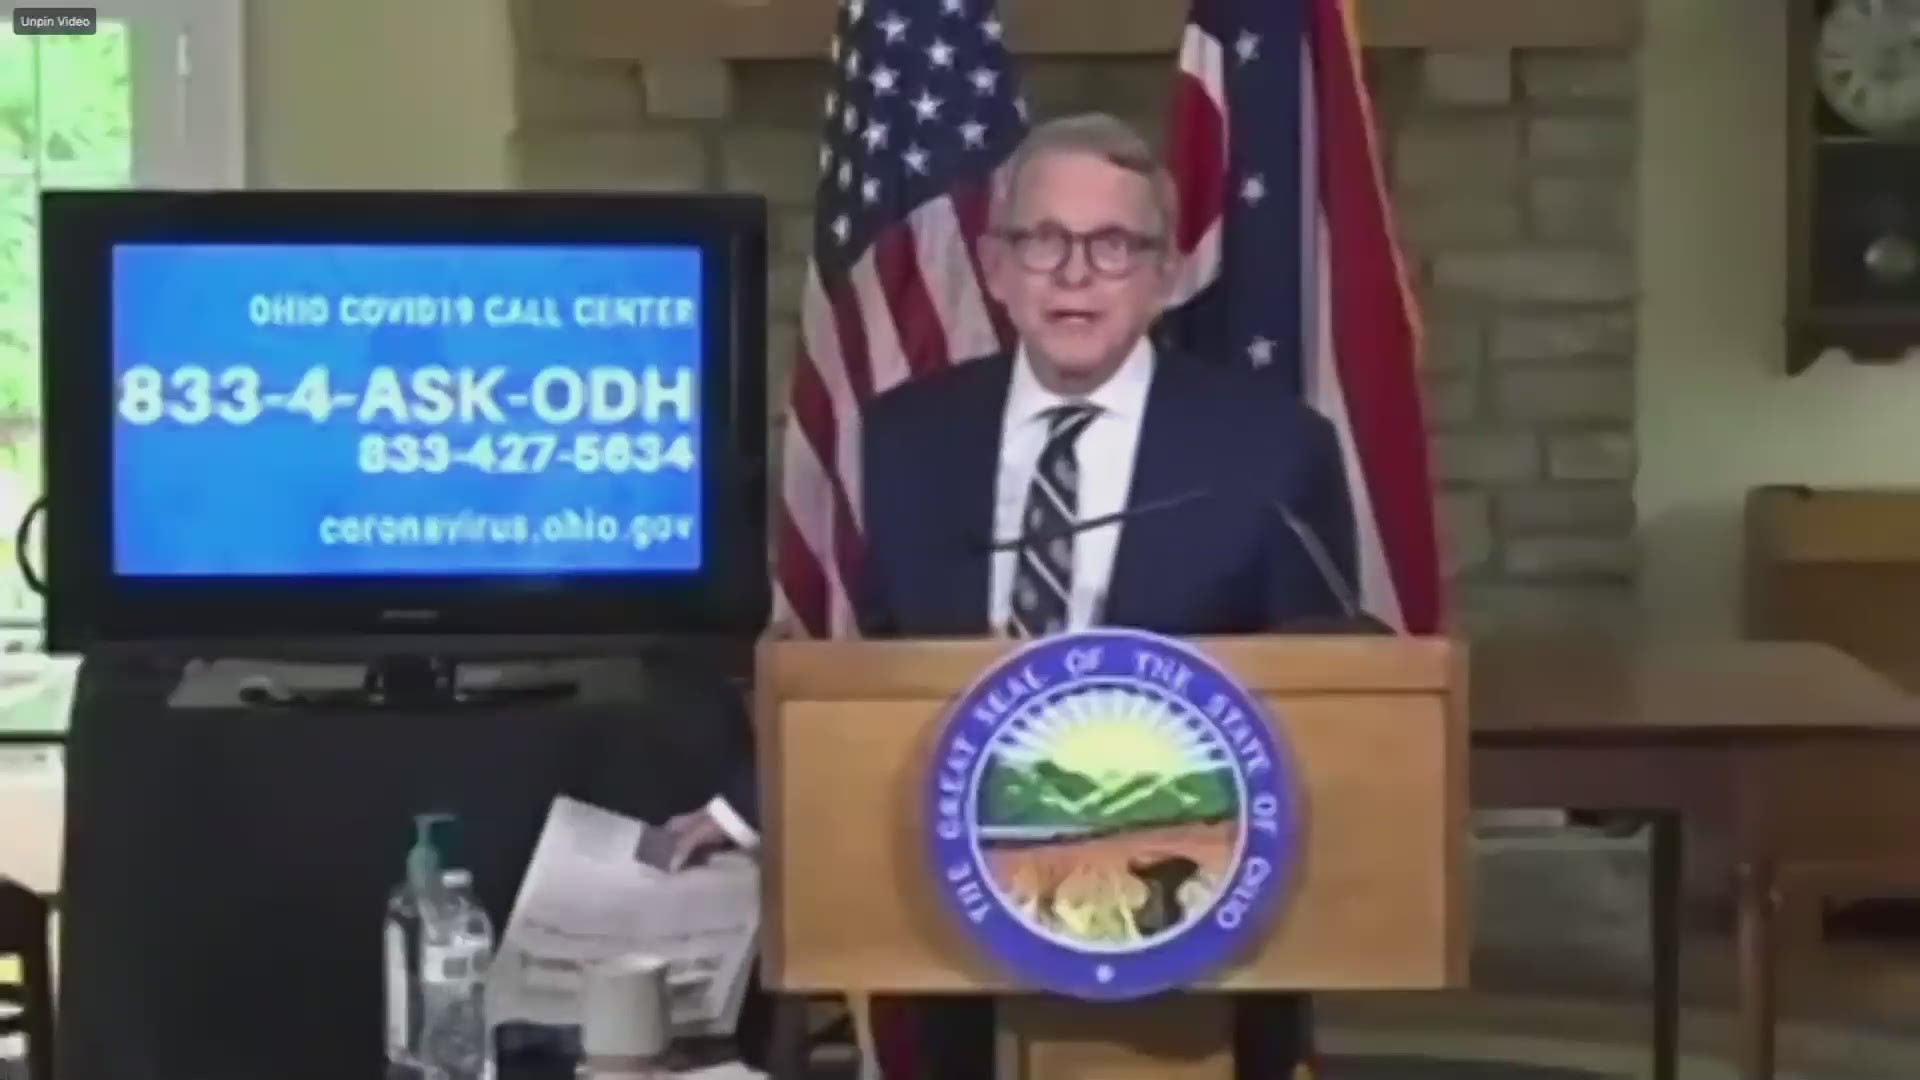 DeWine tested positive for COVID-19 and then negative on a second and third test. The second test was a PCR test.